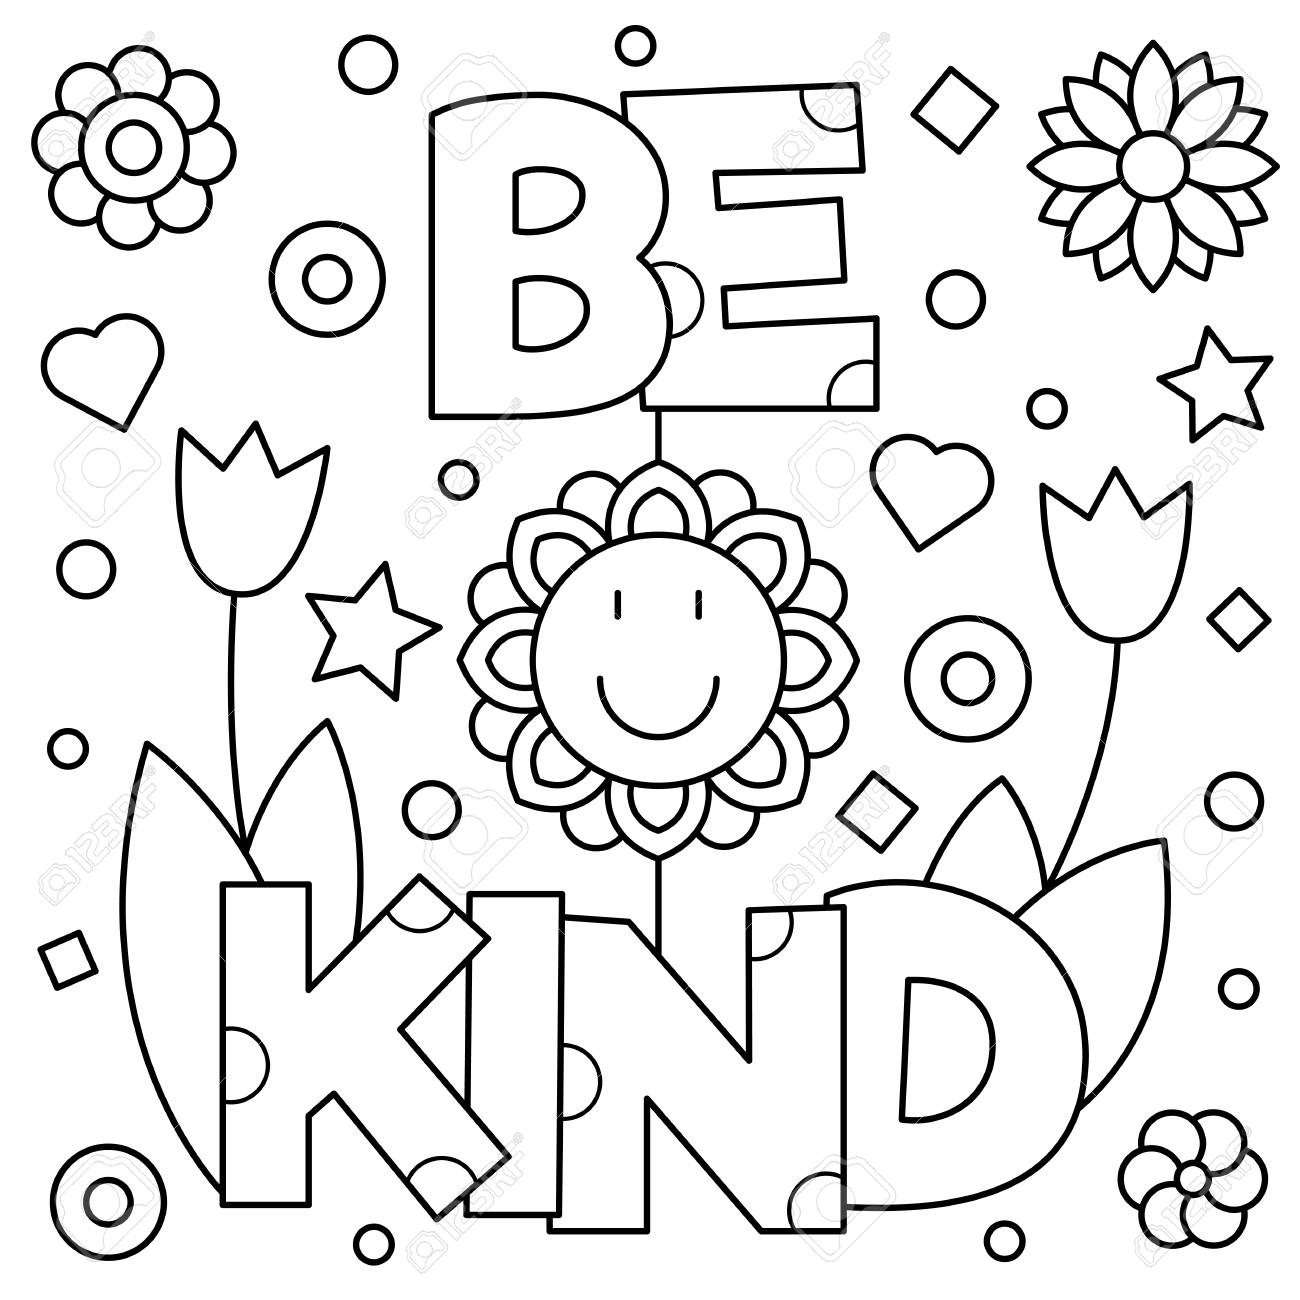 Free Printable Kindness Coloring Pages - Get Your Hands on Amazing Free ...